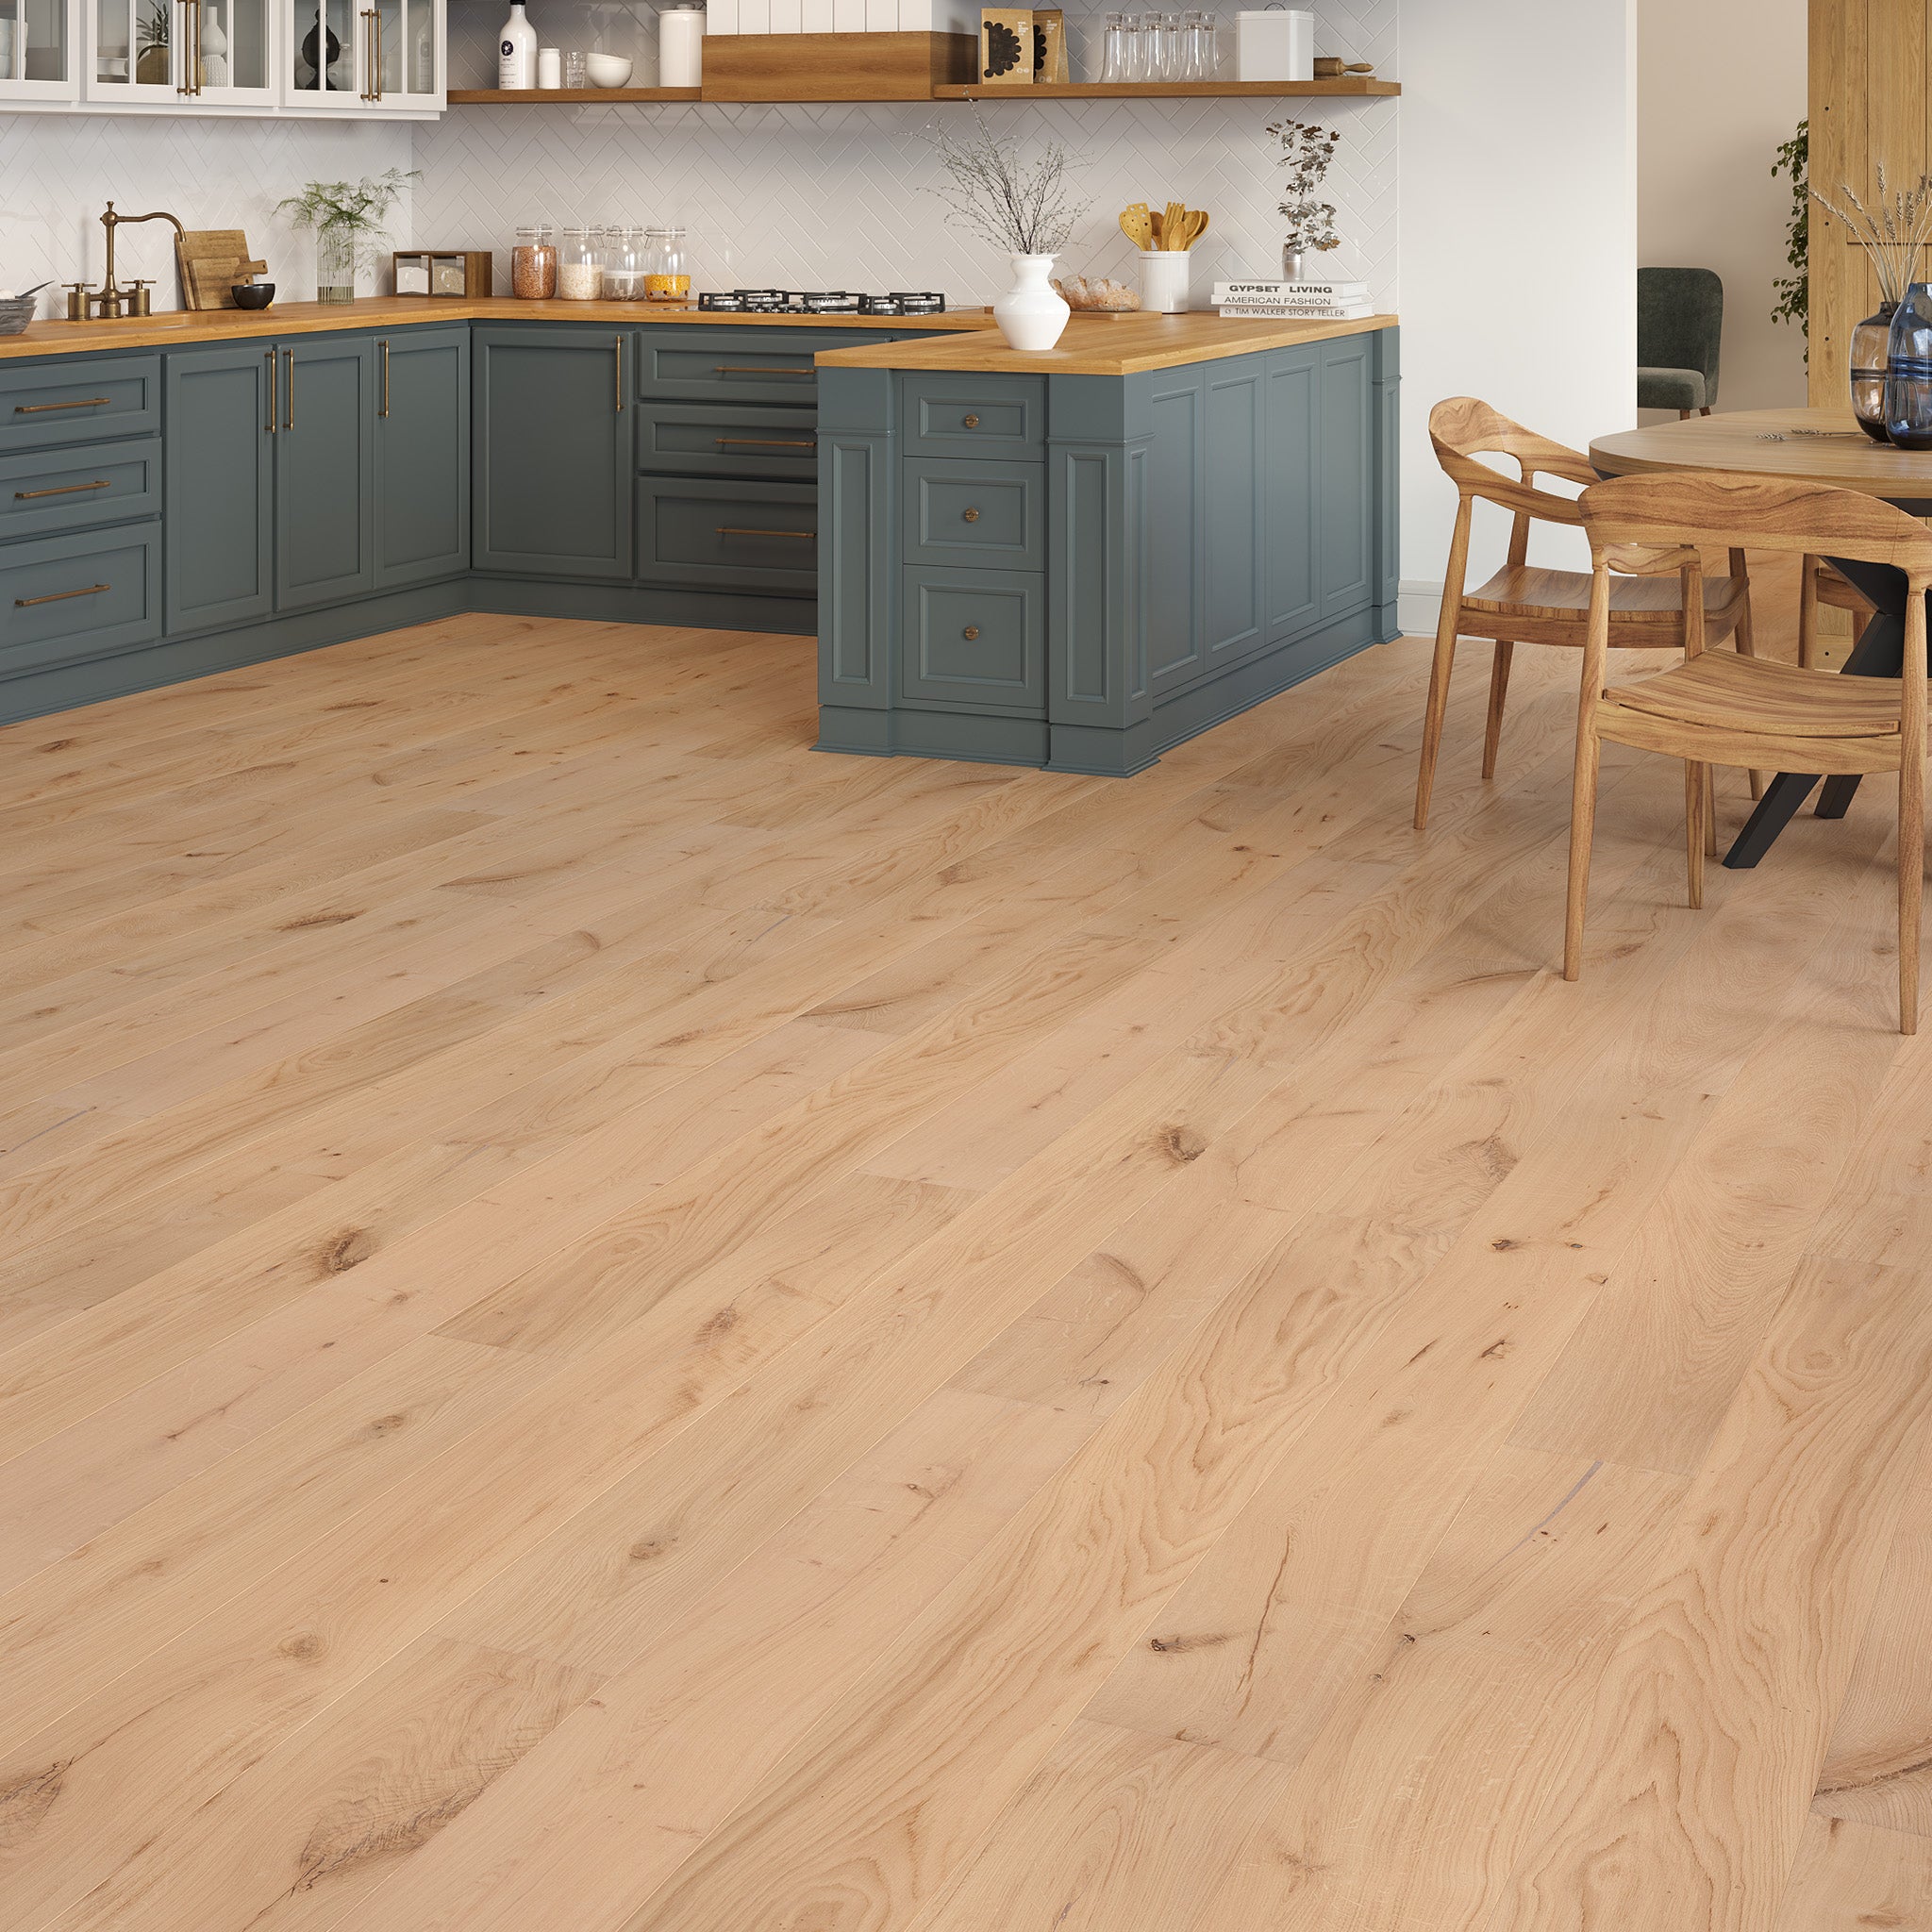 Petunia Oak Smooth Unfinished Rustic 14/3 x 190mm Straight Engineered